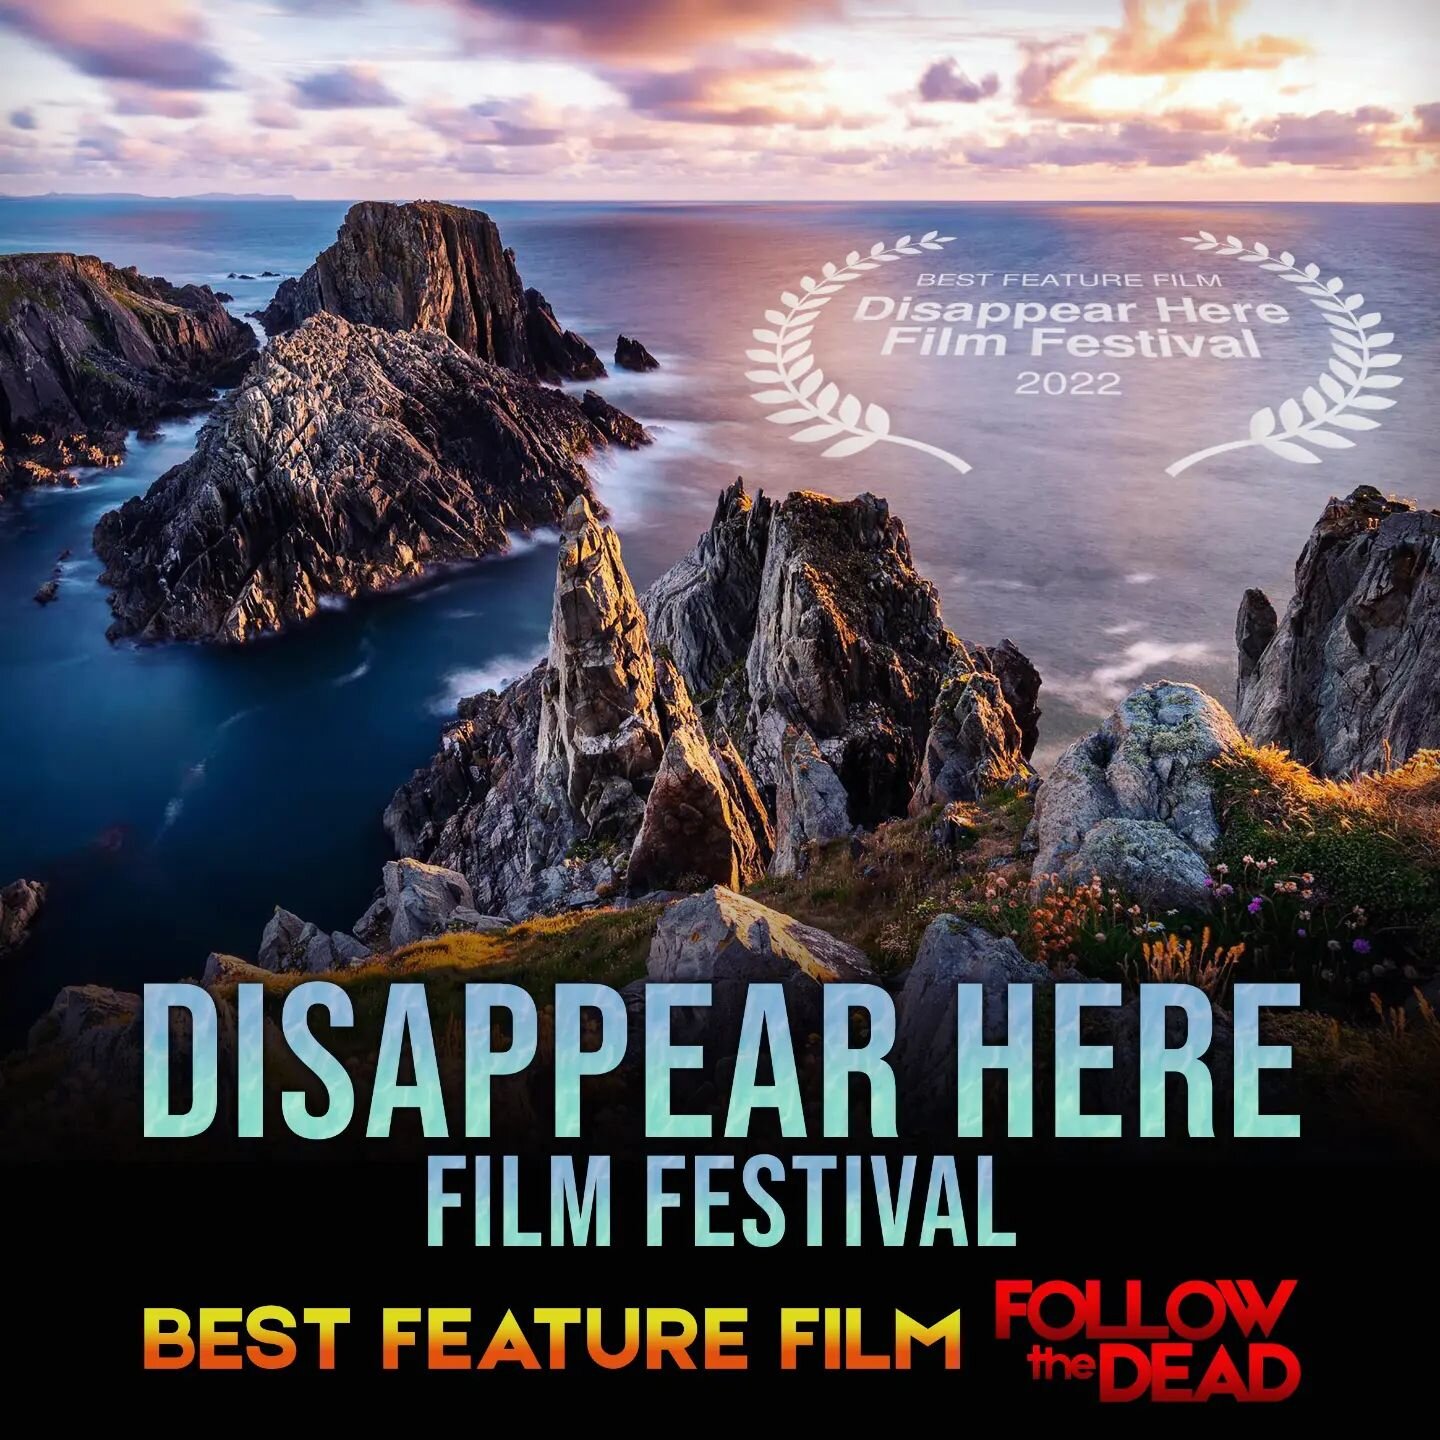 🏆 BESTOWED IN BALLYLIFFIN 🏆

Ecstatic doesn't do justice to how we feel about winning the Best Feature Film award at the Disappear Here Film Festival! To continue to be appreciated by Irish audiences is an honour beyond description 🤗❤️

Thanks so 